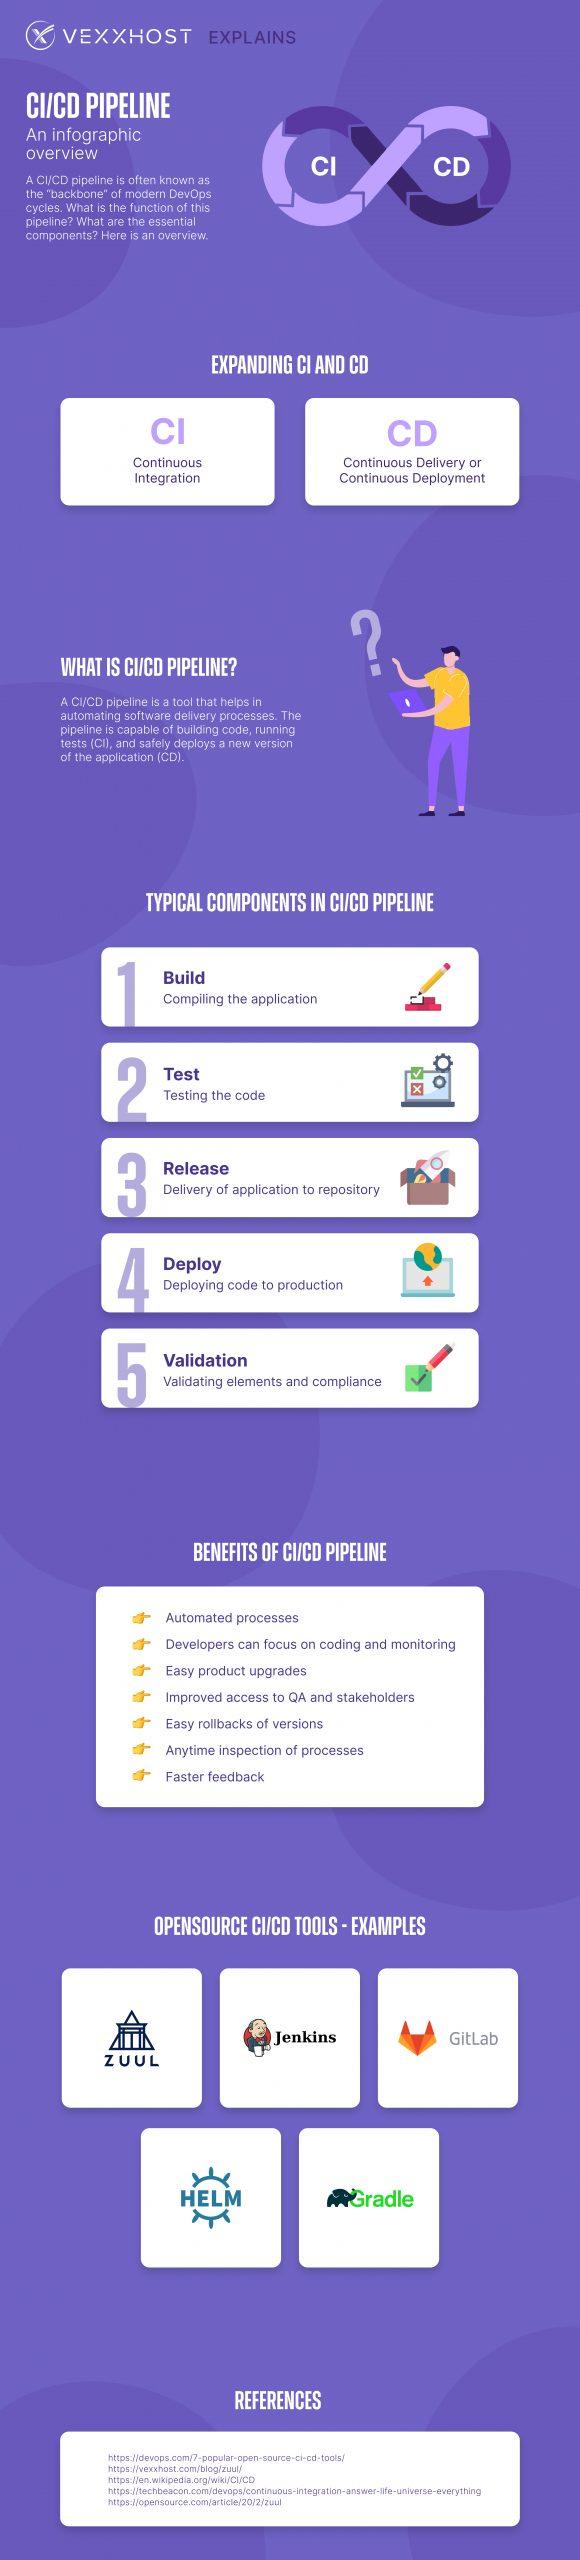 CI/CD Pipeline - An infographic Overview